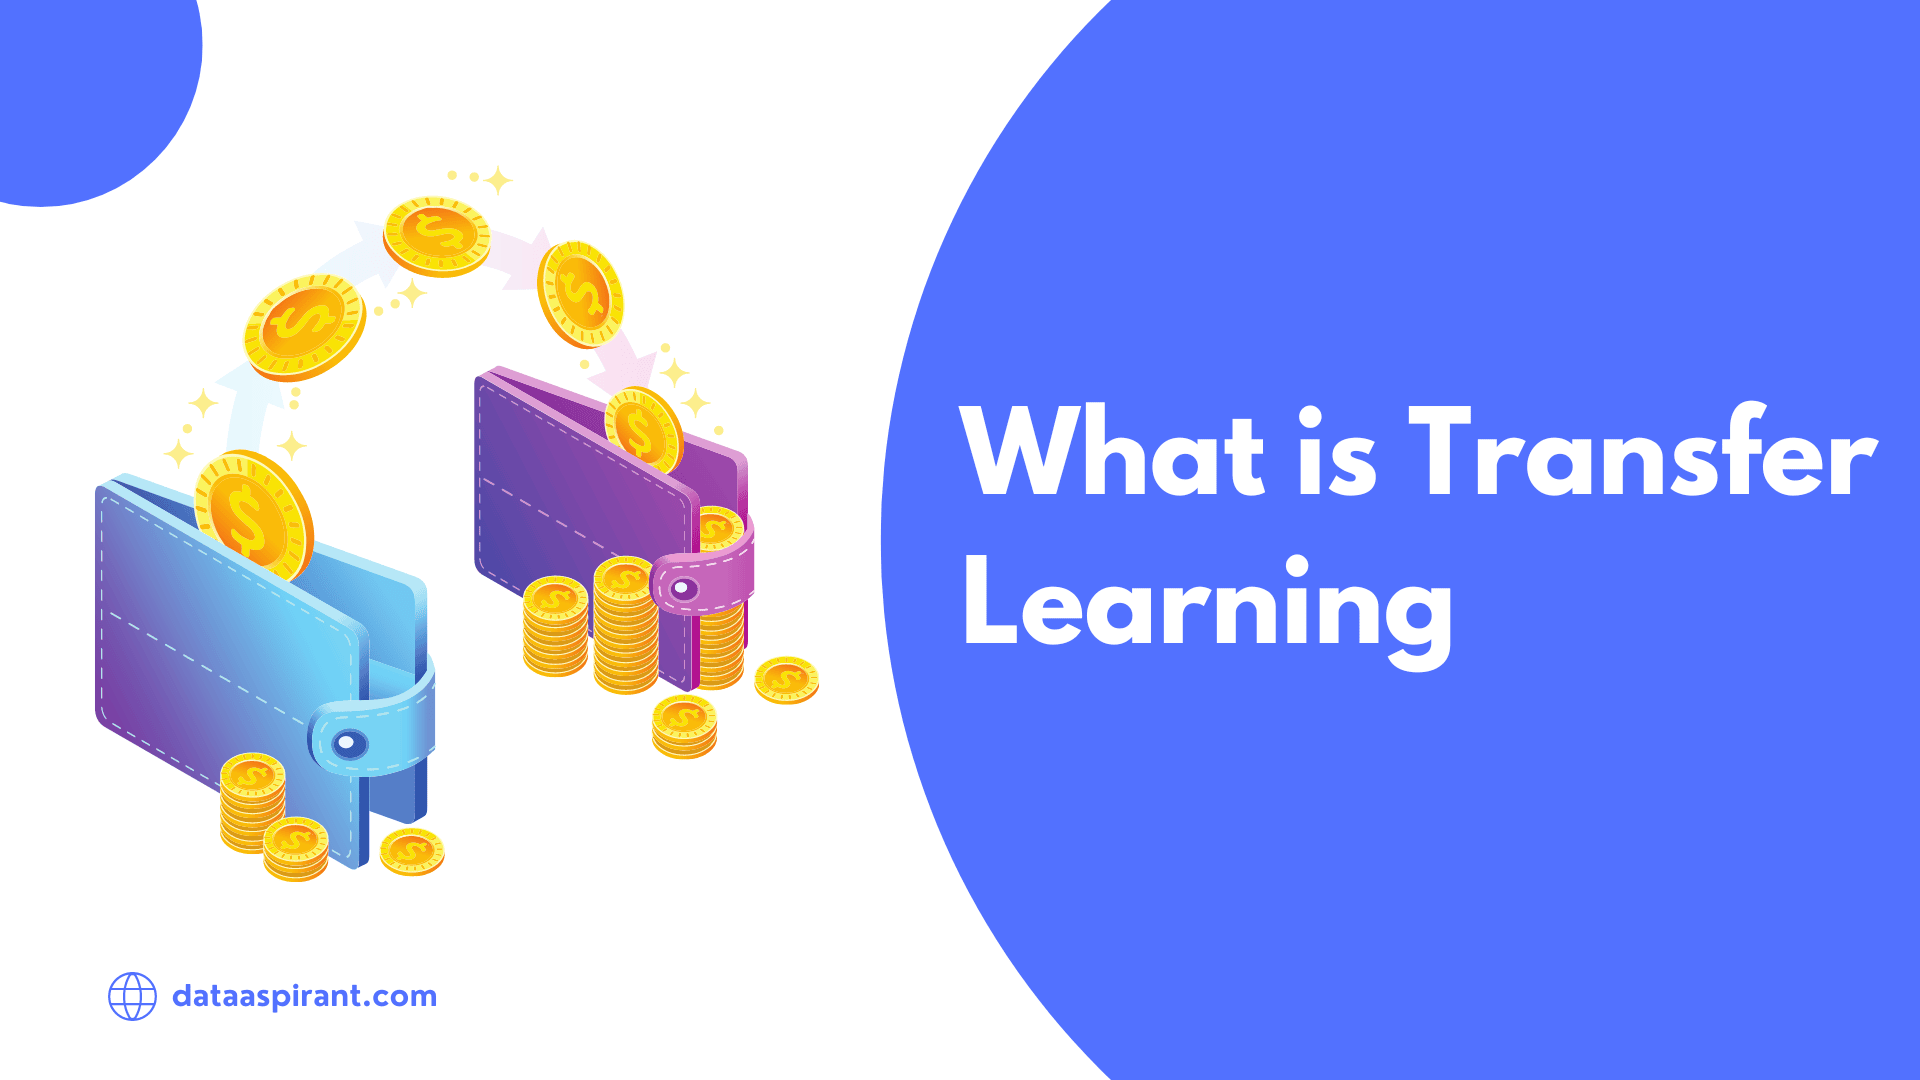 What Is Transfer Learning?